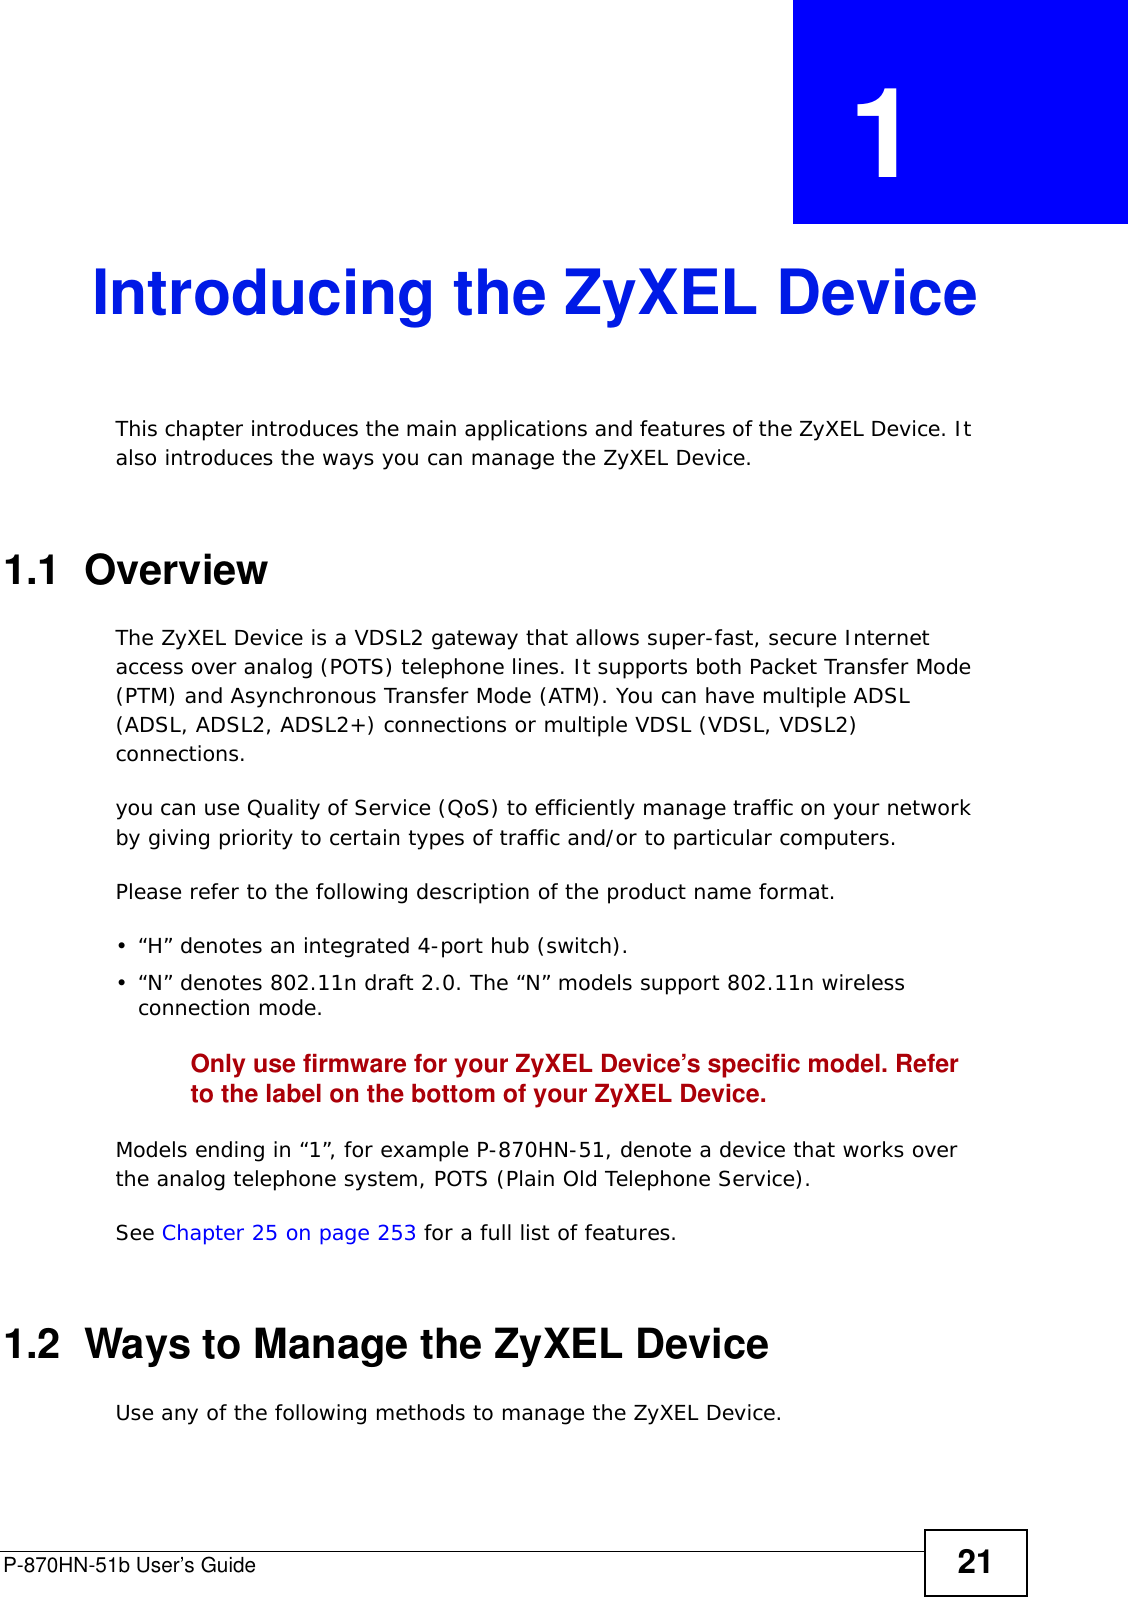 P-870HN-51b User’s Guide 21CHAPTER  1 Introducing the ZyXEL DeviceThis chapter introduces the main applications and features of the ZyXEL Device. It also introduces the ways you can manage the ZyXEL Device.1.1  OverviewThe ZyXEL Device is a VDSL2 gateway that allows super-fast, secure Internet access over analog (POTS) telephone lines. It supports both Packet Transfer Mode (PTM) and Asynchronous Transfer Mode (ATM). You can have multiple ADSL (ADSL, ADSL2, ADSL2+) connections or multiple VDSL (VDSL, VDSL2) connections. you can use Quality of Service (QoS) to efficiently manage traffic on your network by giving priority to certain types of traffic and/or to particular computers.Please refer to the following description of the product name format.• “H” denotes an integrated 4-port hub (switch). • “N” denotes 802.11n draft 2.0. The “N” models support 802.11n wireless connection mode.Only use firmware for your ZyXEL Device’s specific model. Refer to the label on the bottom of your ZyXEL Device.Models ending in “1”, for example P-870HN-51, denote a device that works over the analog telephone system, POTS (Plain Old Telephone Service). See Chapter 25 on page 253 for a full list of features.1.2  Ways to Manage the ZyXEL DeviceUse any of the following methods to manage the ZyXEL Device.